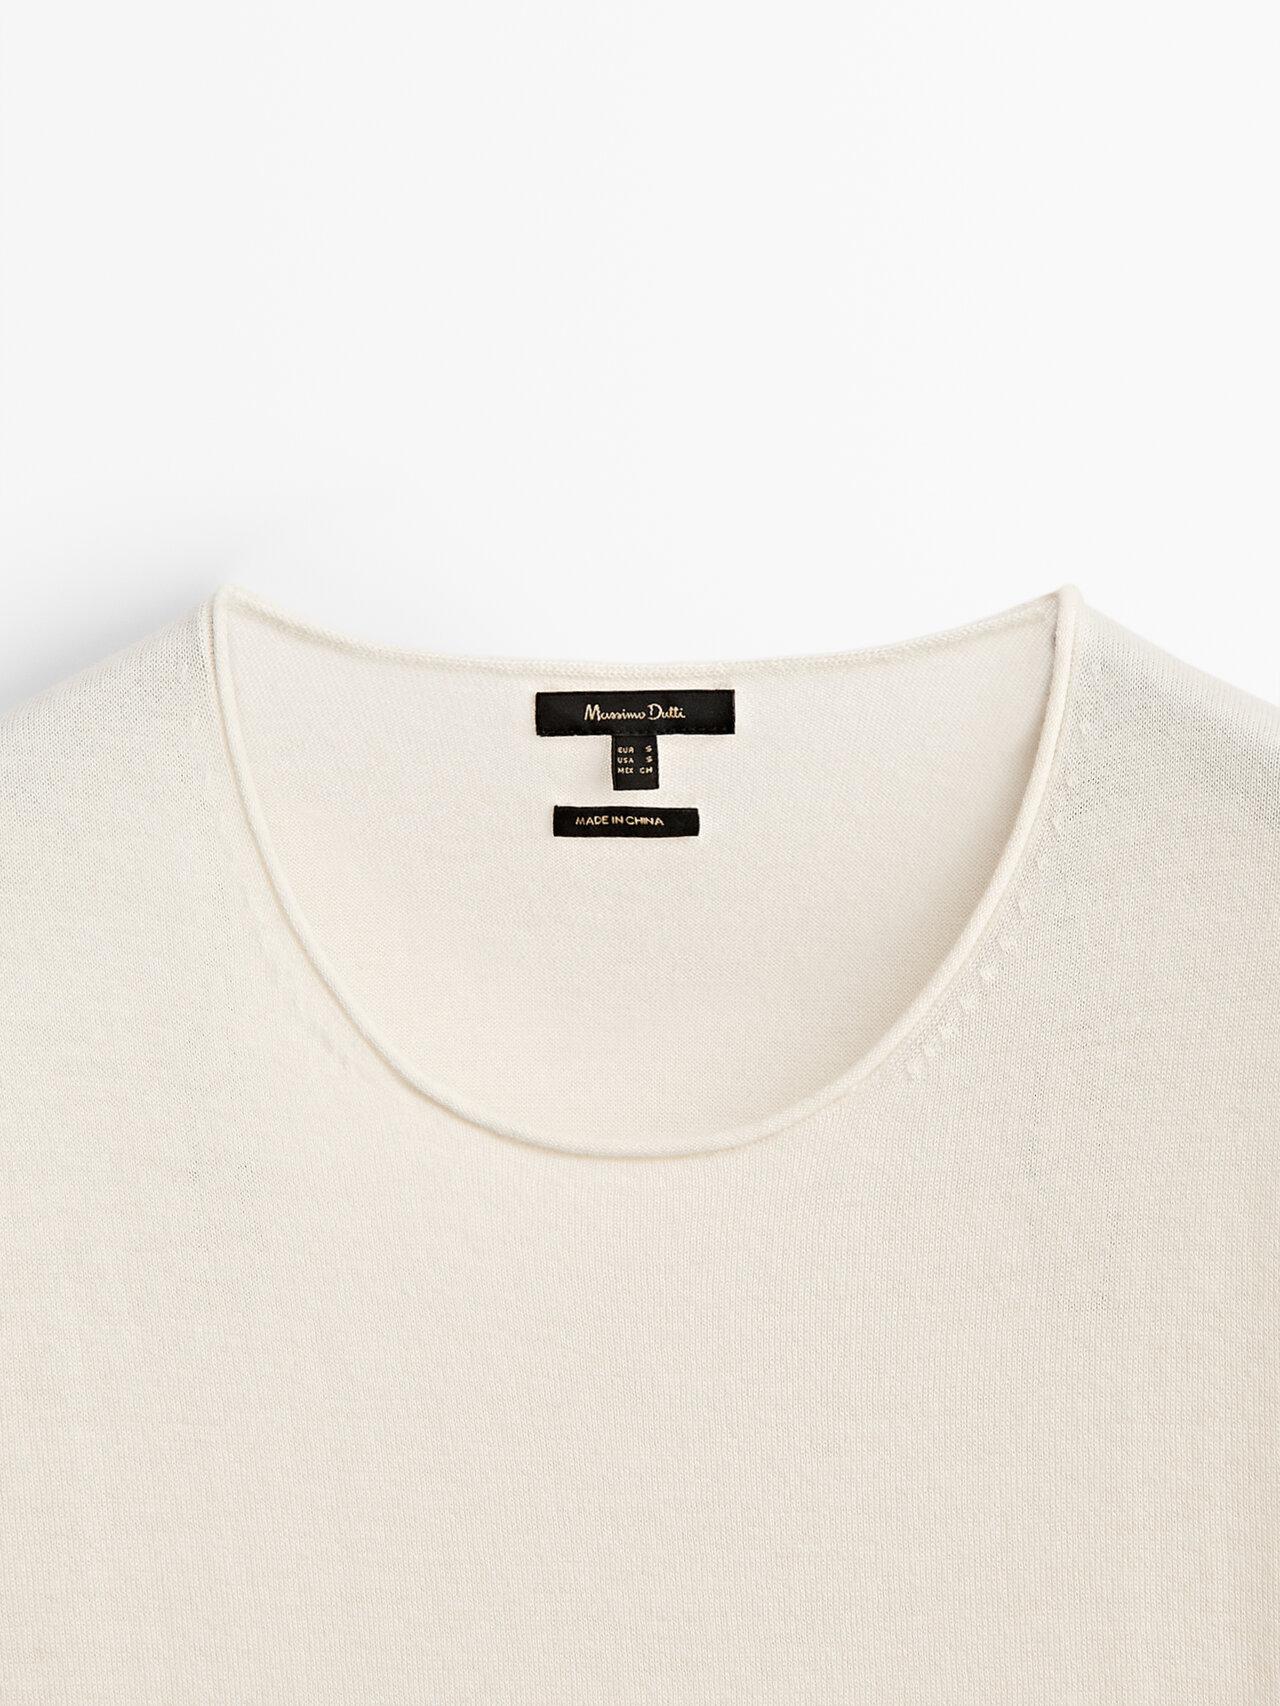 MASSIMO DUTTI Short Sleeve Knit T-shirt in Cream (Natural) | Lyst